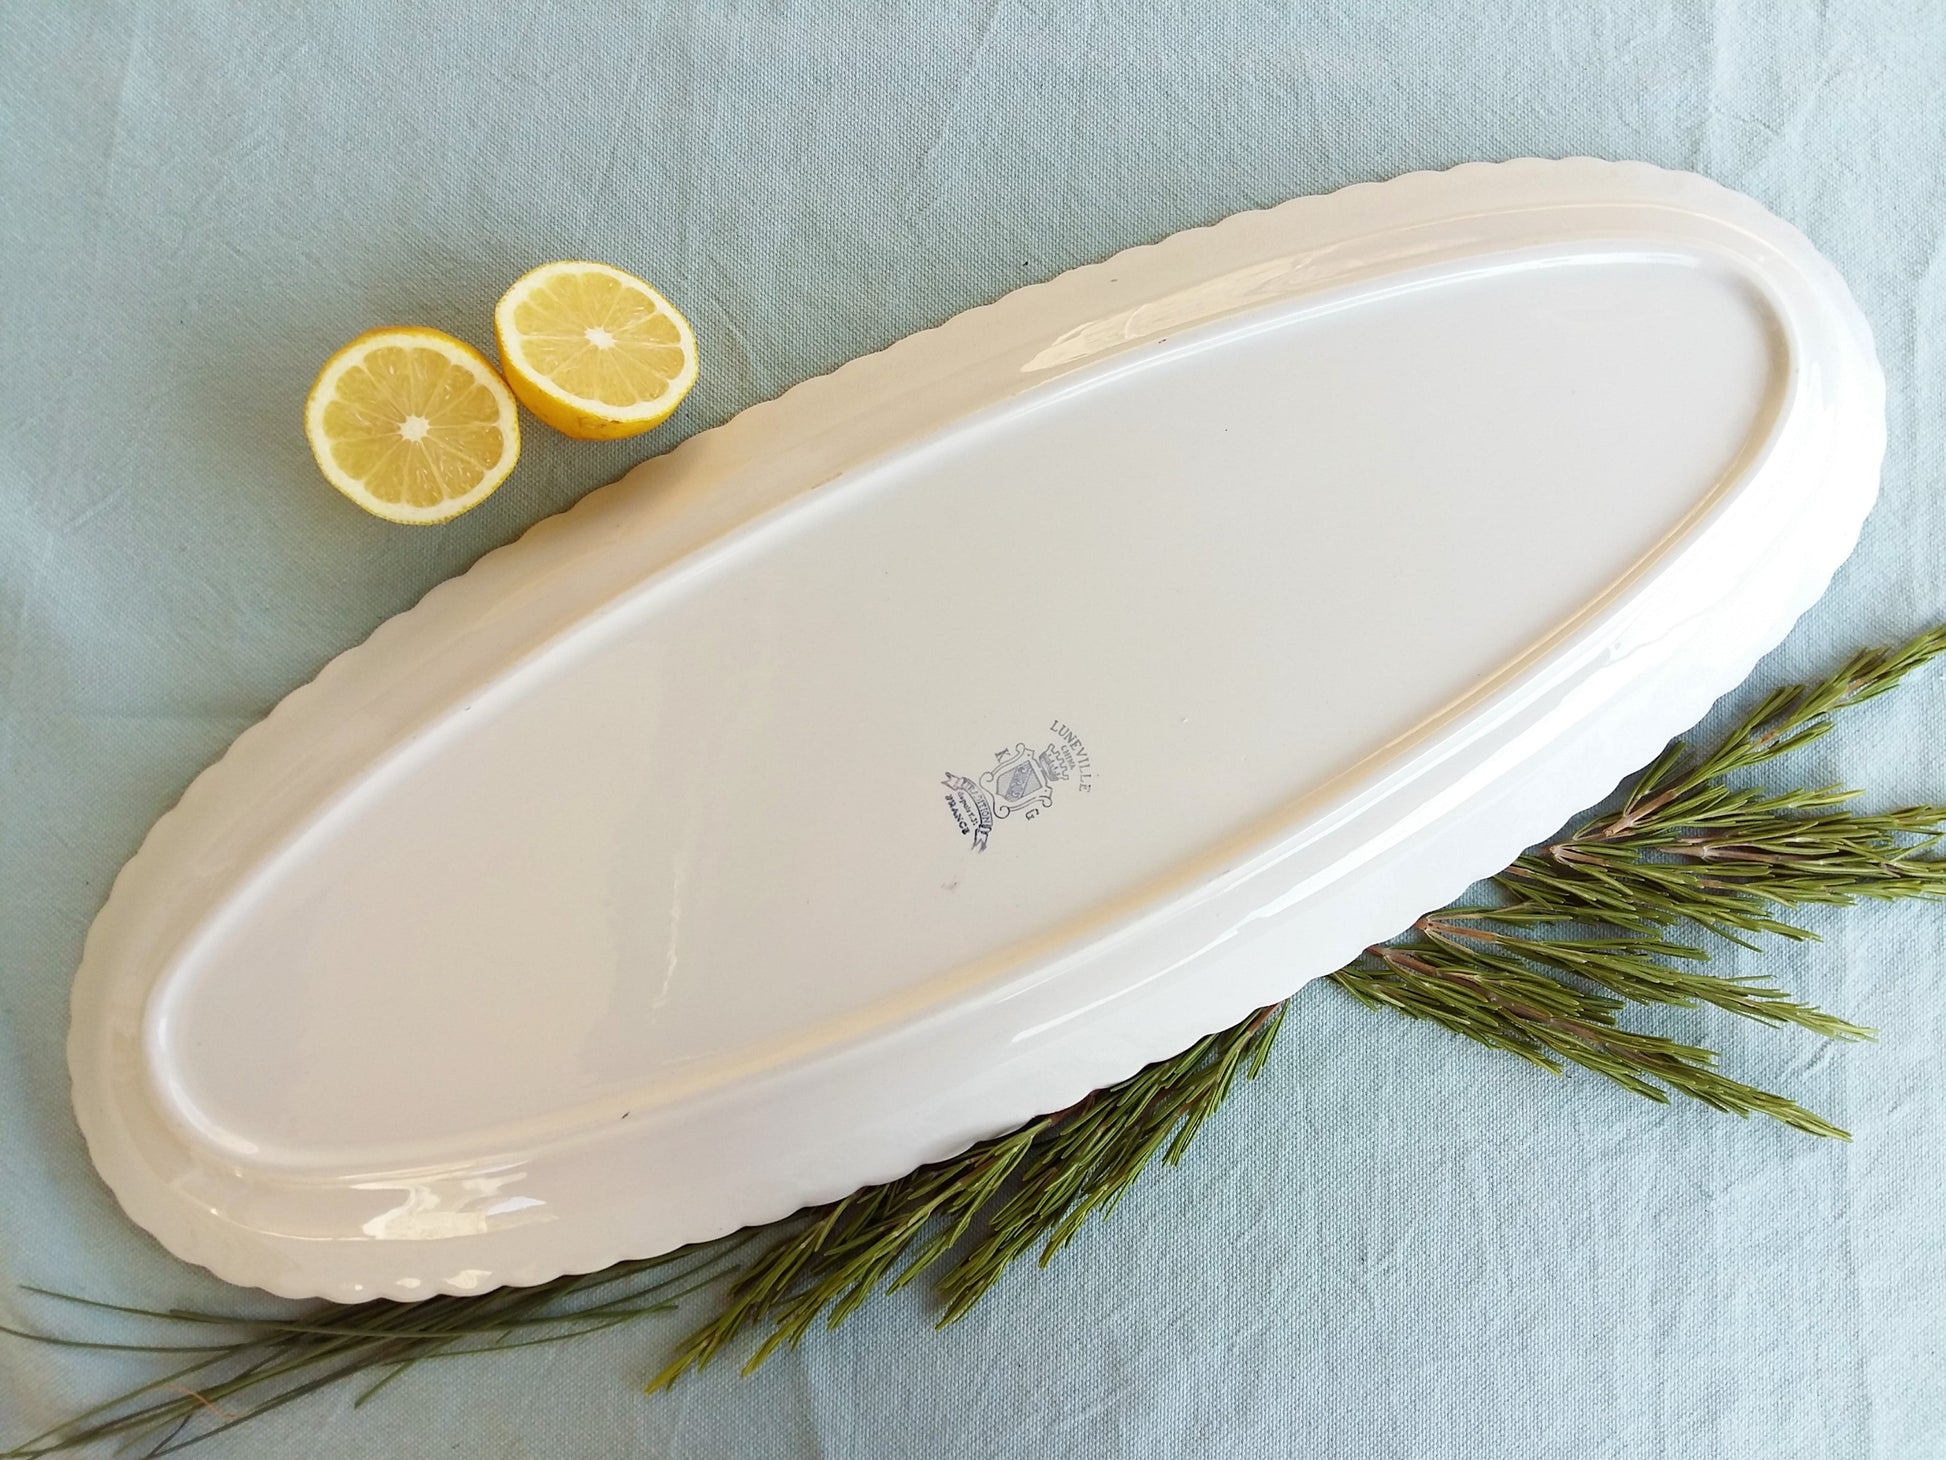 Extra Long, French, Porcelain, "Lunéville" Fish Platter With Gilded Trim. from Tiggy & Pip - Just €160! Shop now at Tiggy and Pip